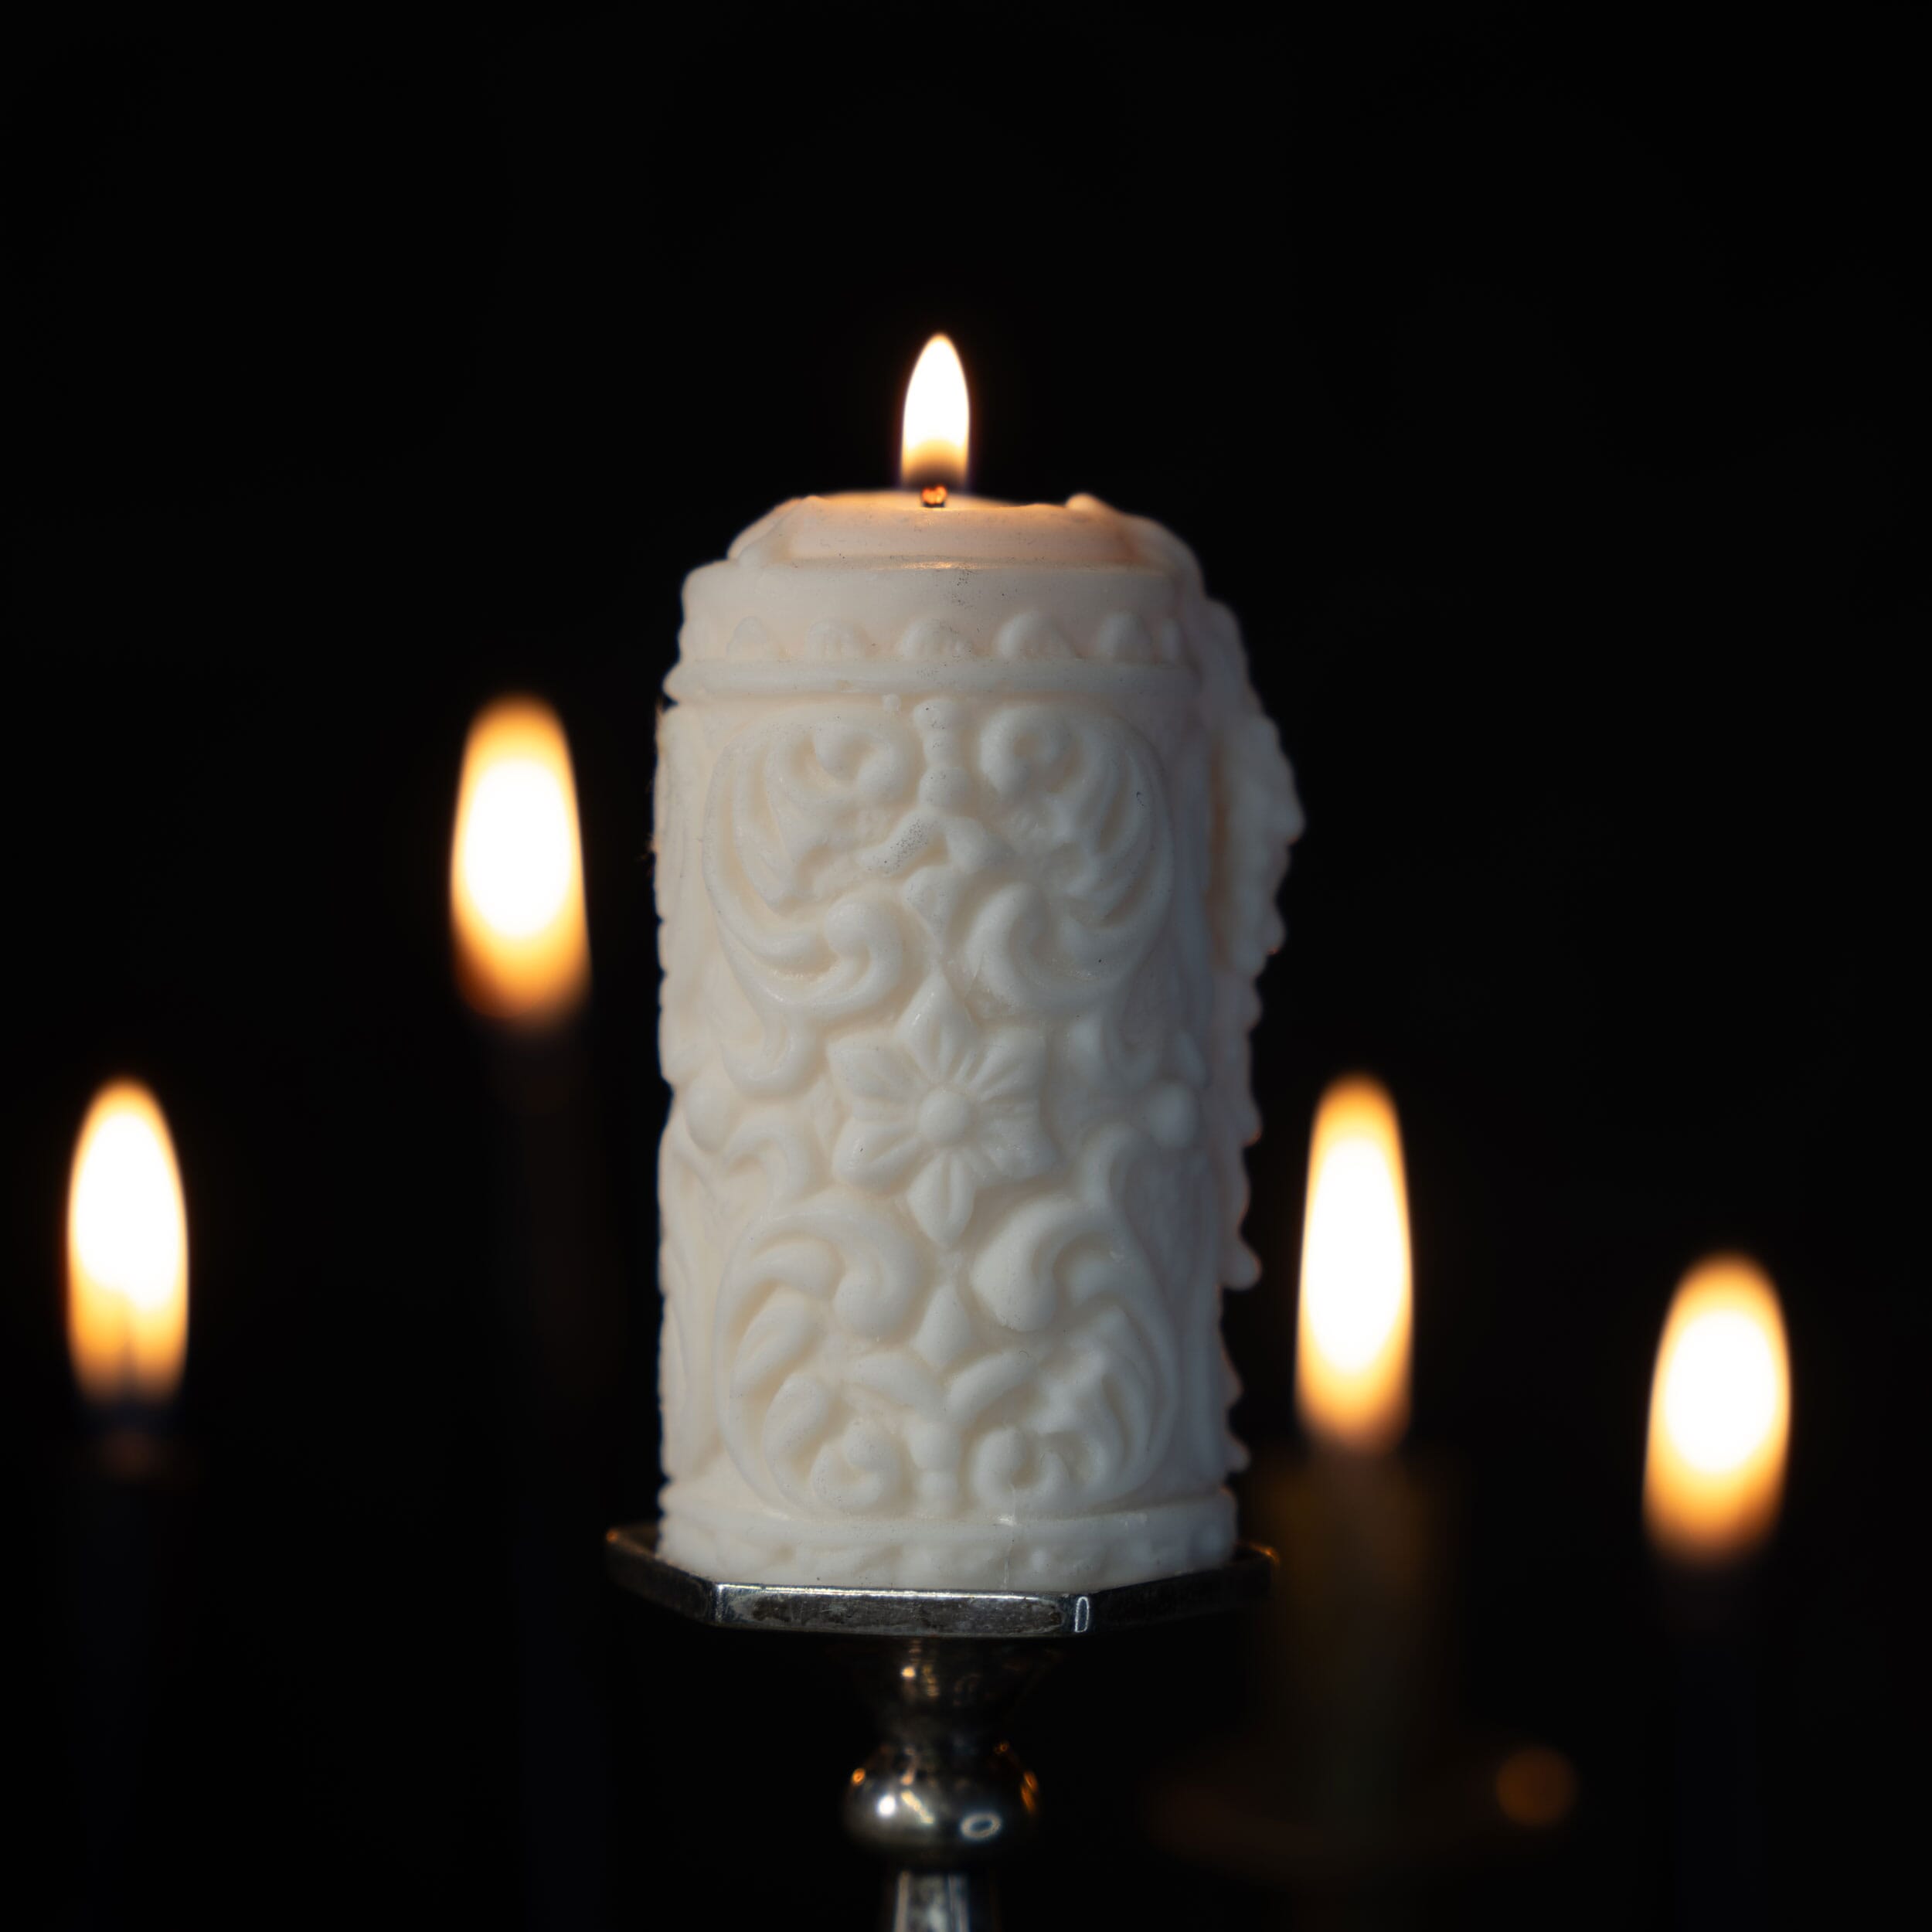 mildred gothic pillar candle the blackened teeth